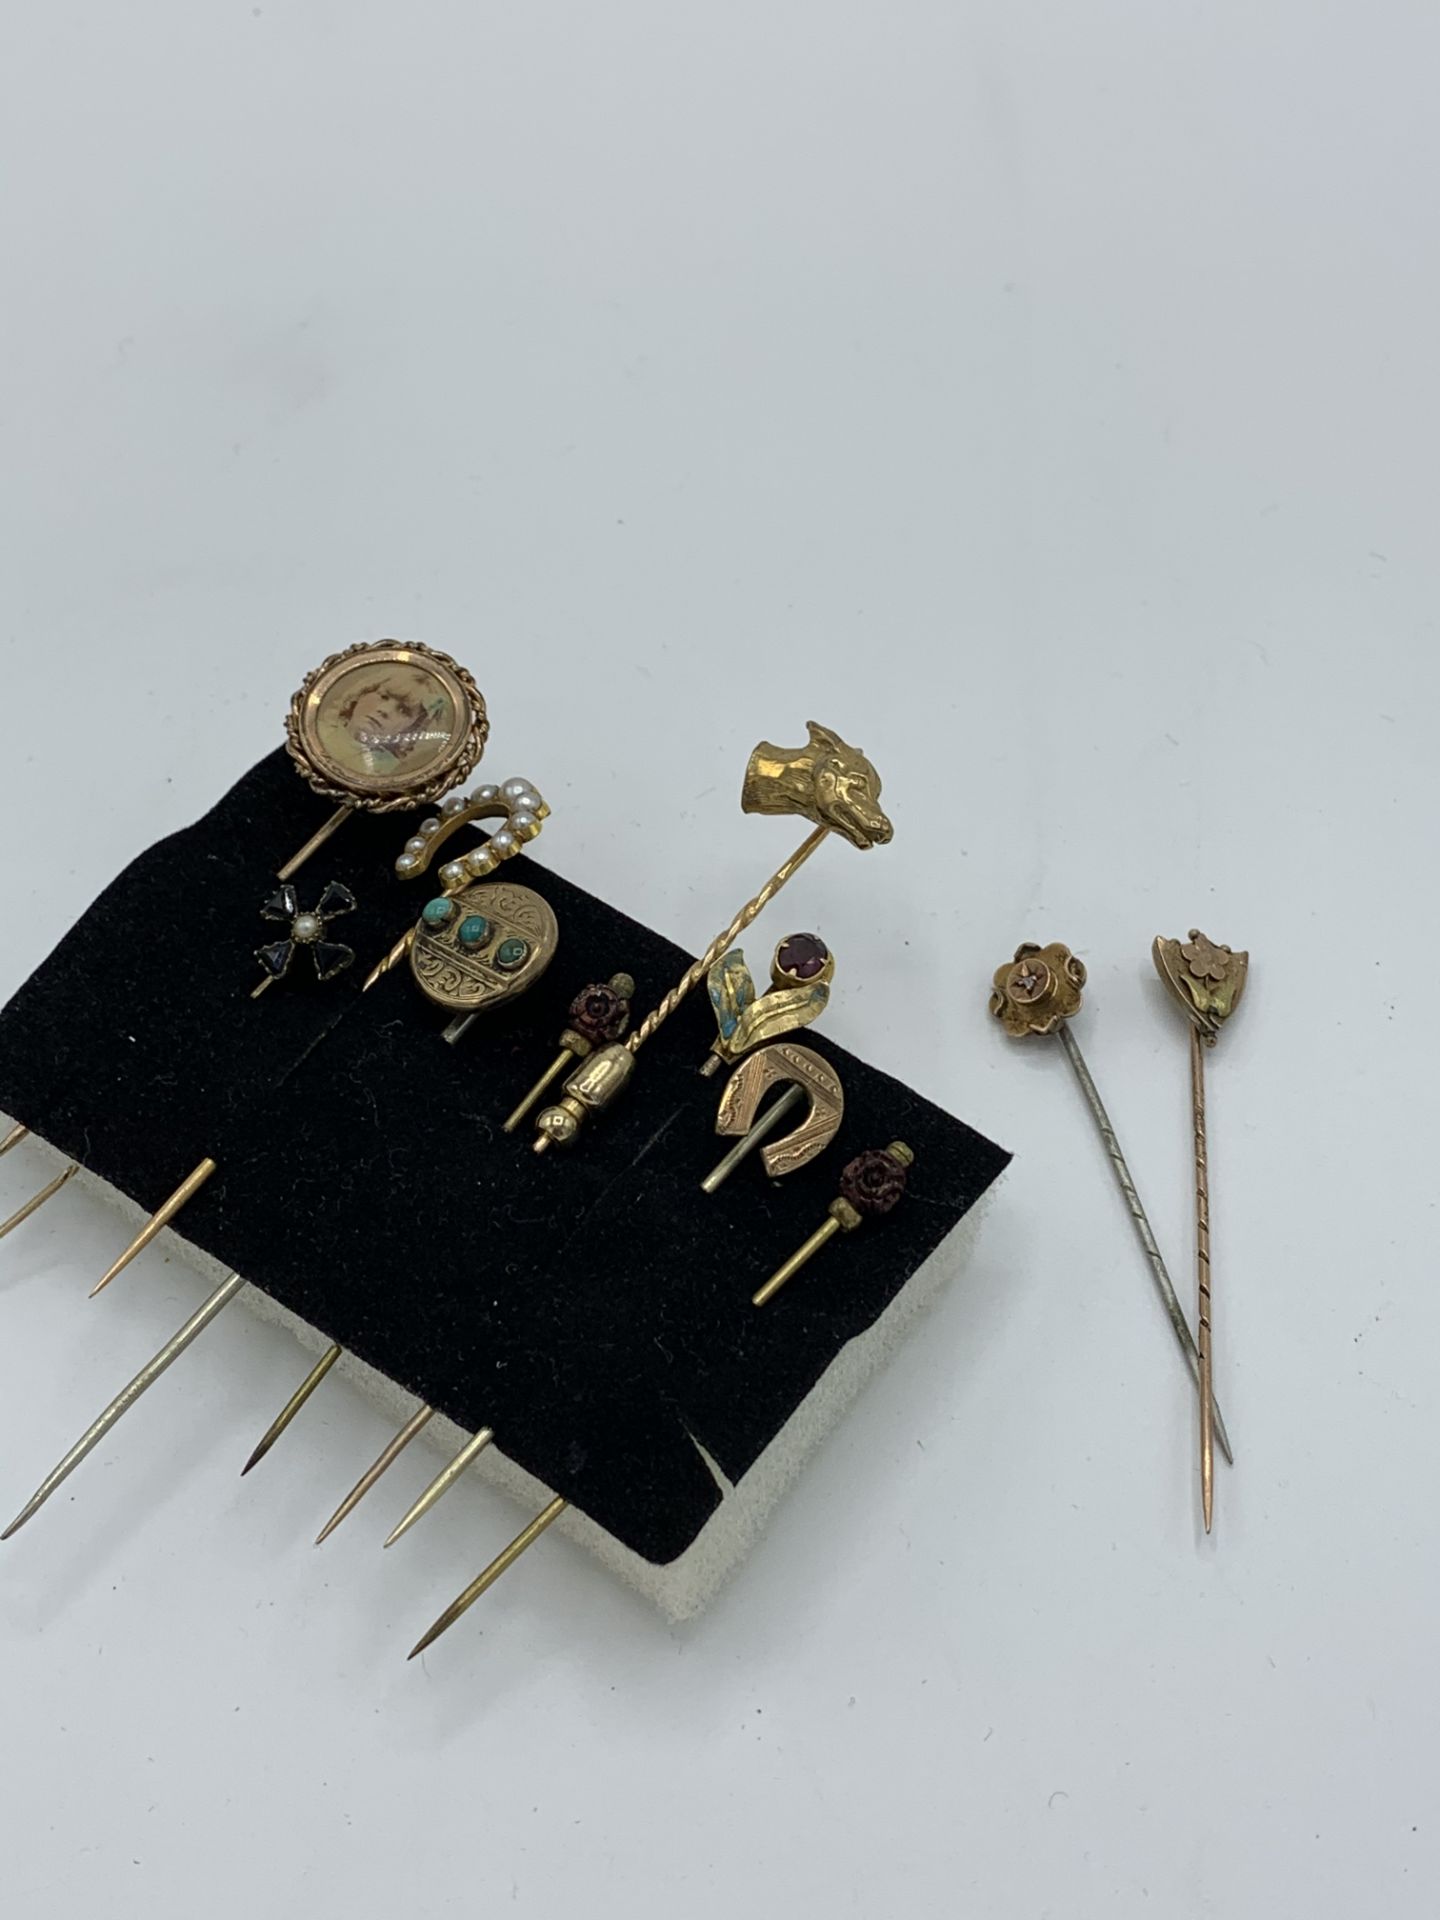 2 x 9ct gold stick pins and 9 others. Estimate £20-30.